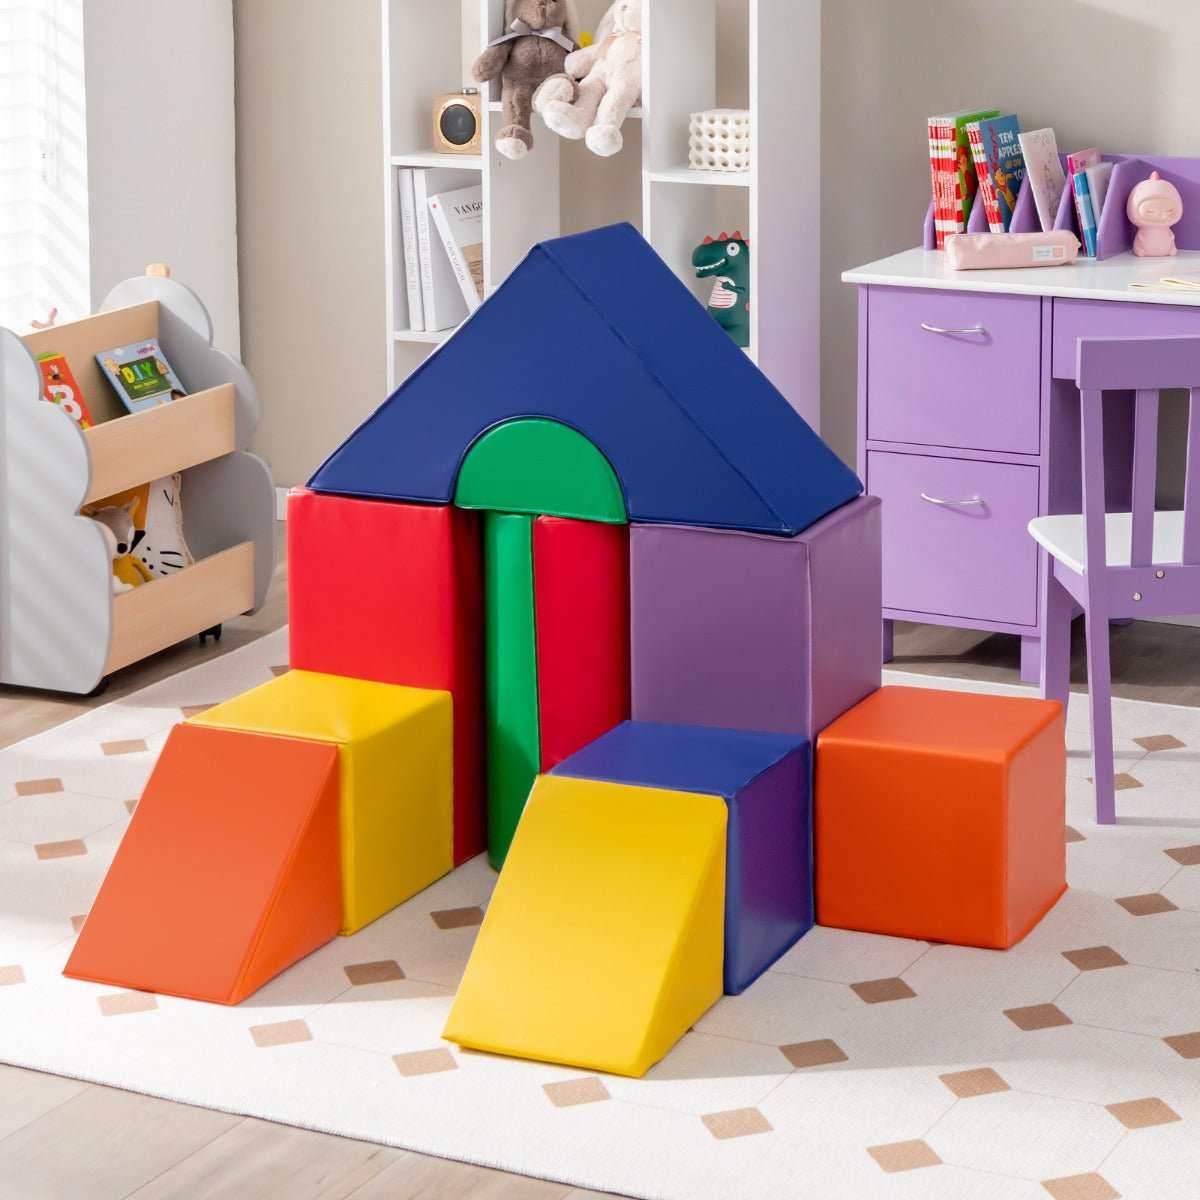 Adventure Awaits with Our 11-Piece Foam Block Play Set